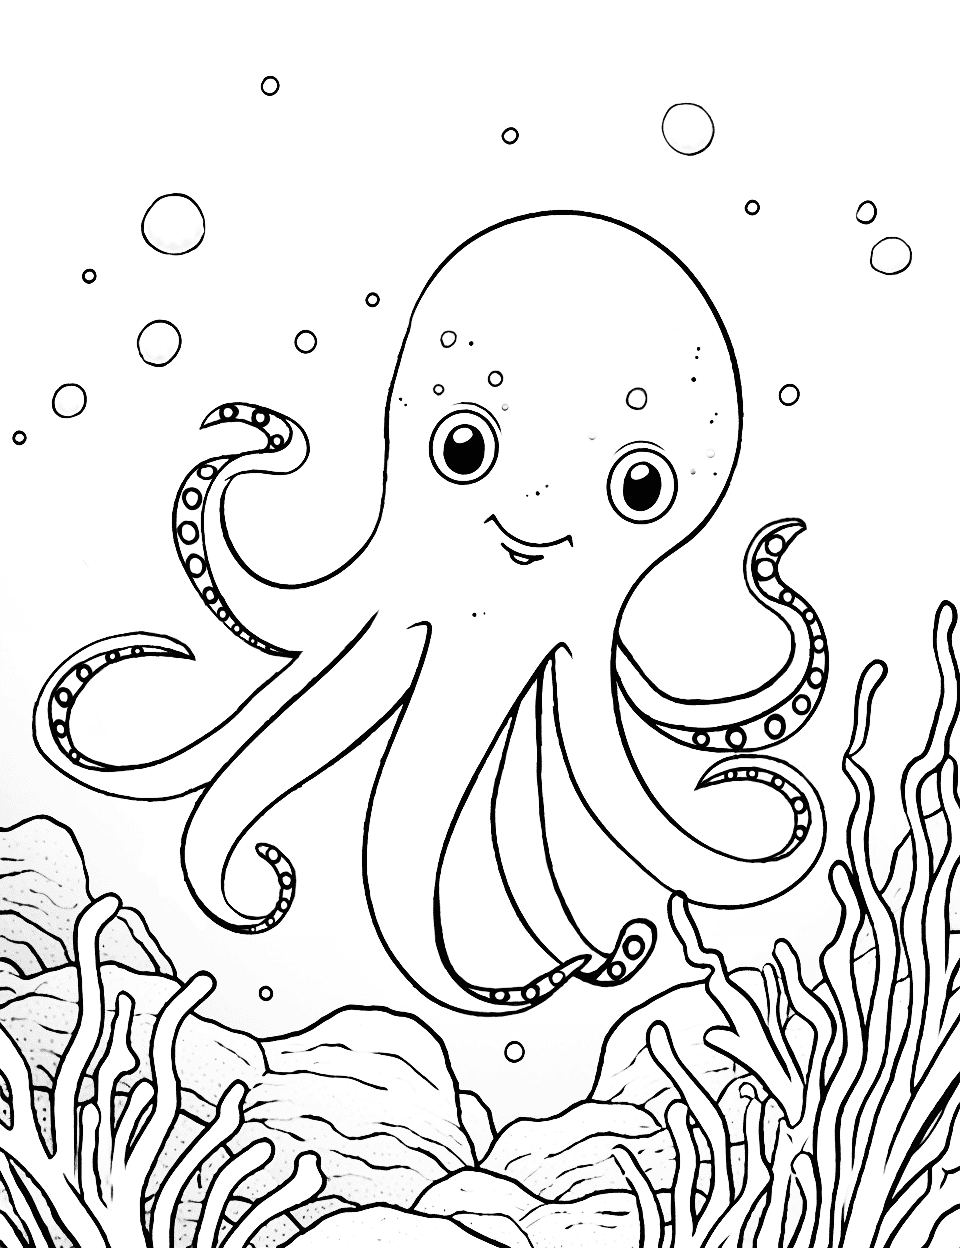 Curious Octopus Animal Coloring Page - An octopus peeking out from behind coral in an underwater scene.